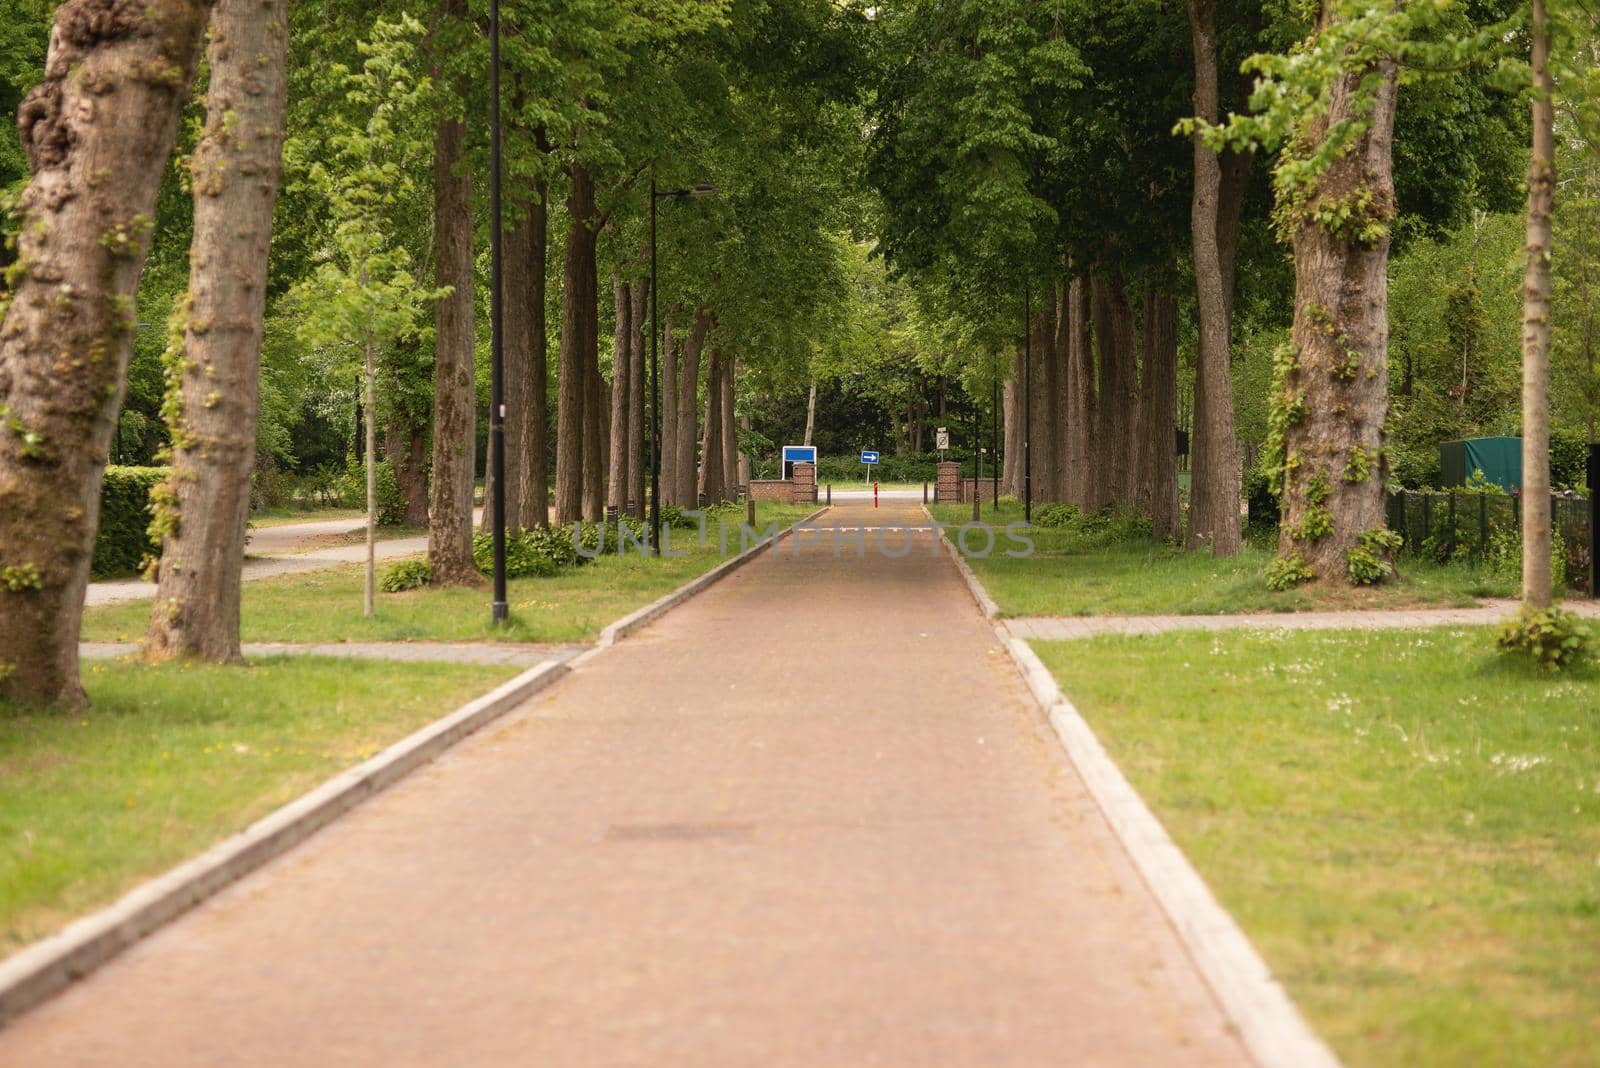 road in the park is made of bricks, along the trees and bushes